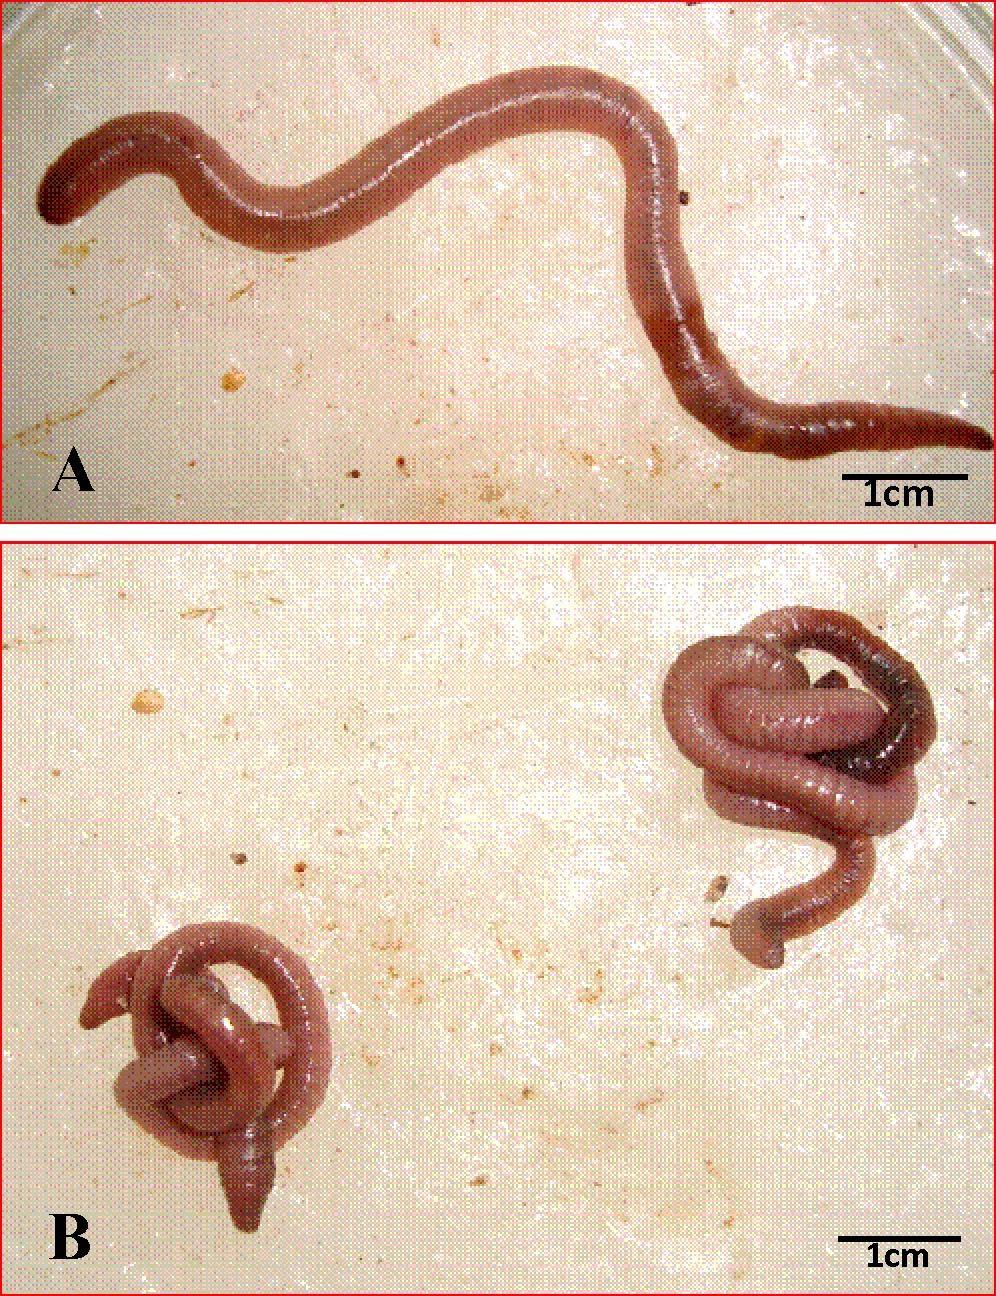 Zanco Journal of Pure and Applied Sciences Figure 1: Lumbricus terristris after four weeks ;A, control (normal body form). B,coiling due to exposure to Ridomil.